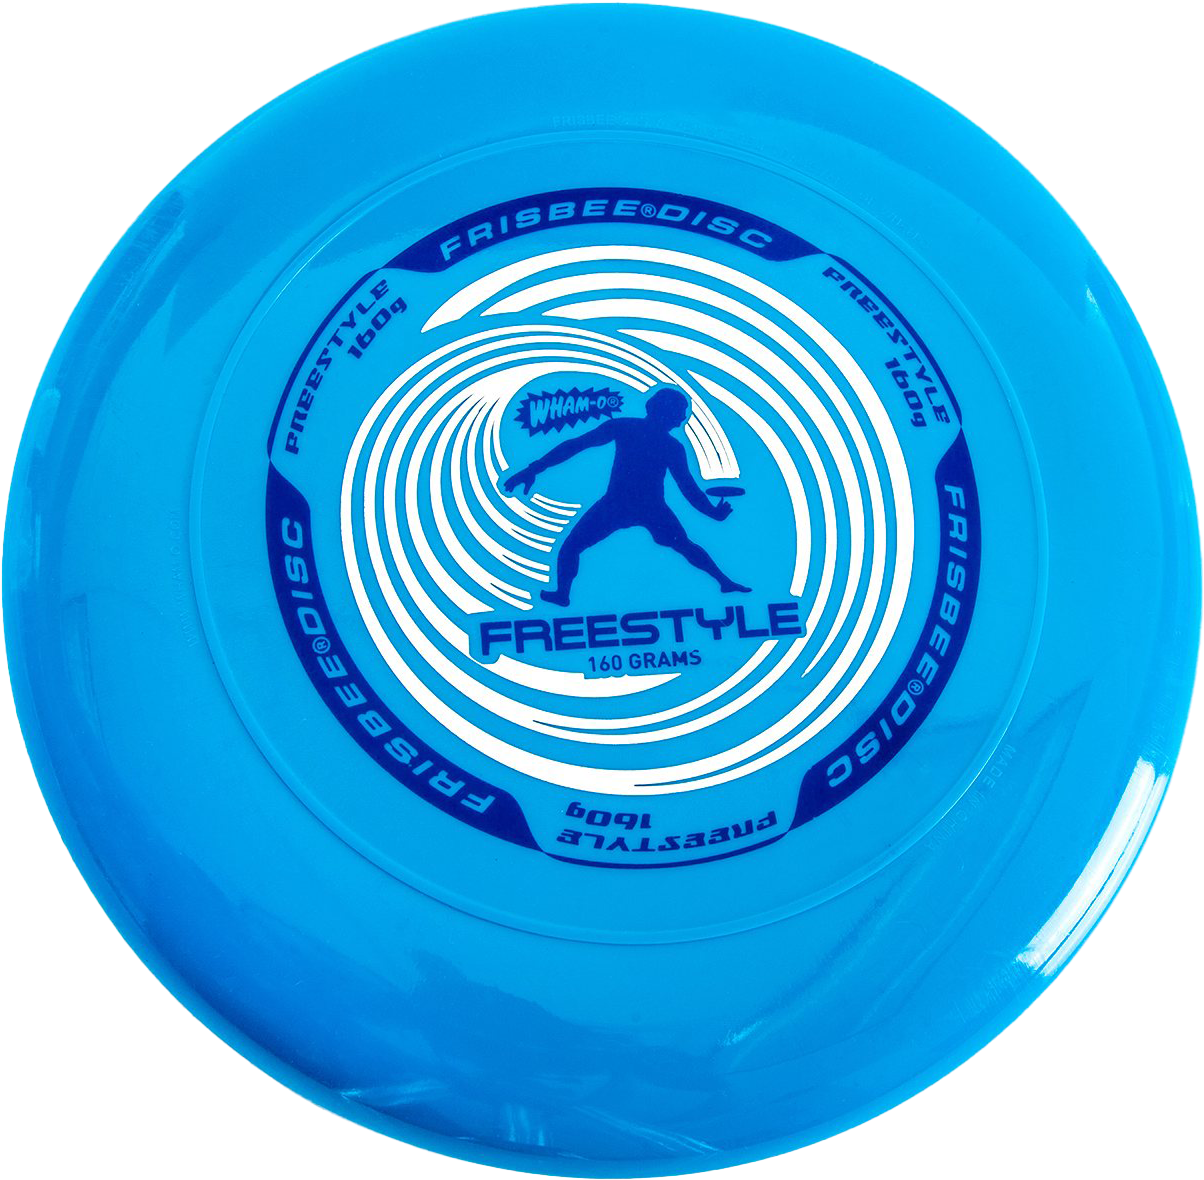 Frisbee Png Photo - Disc Frisbee, Transparent Png